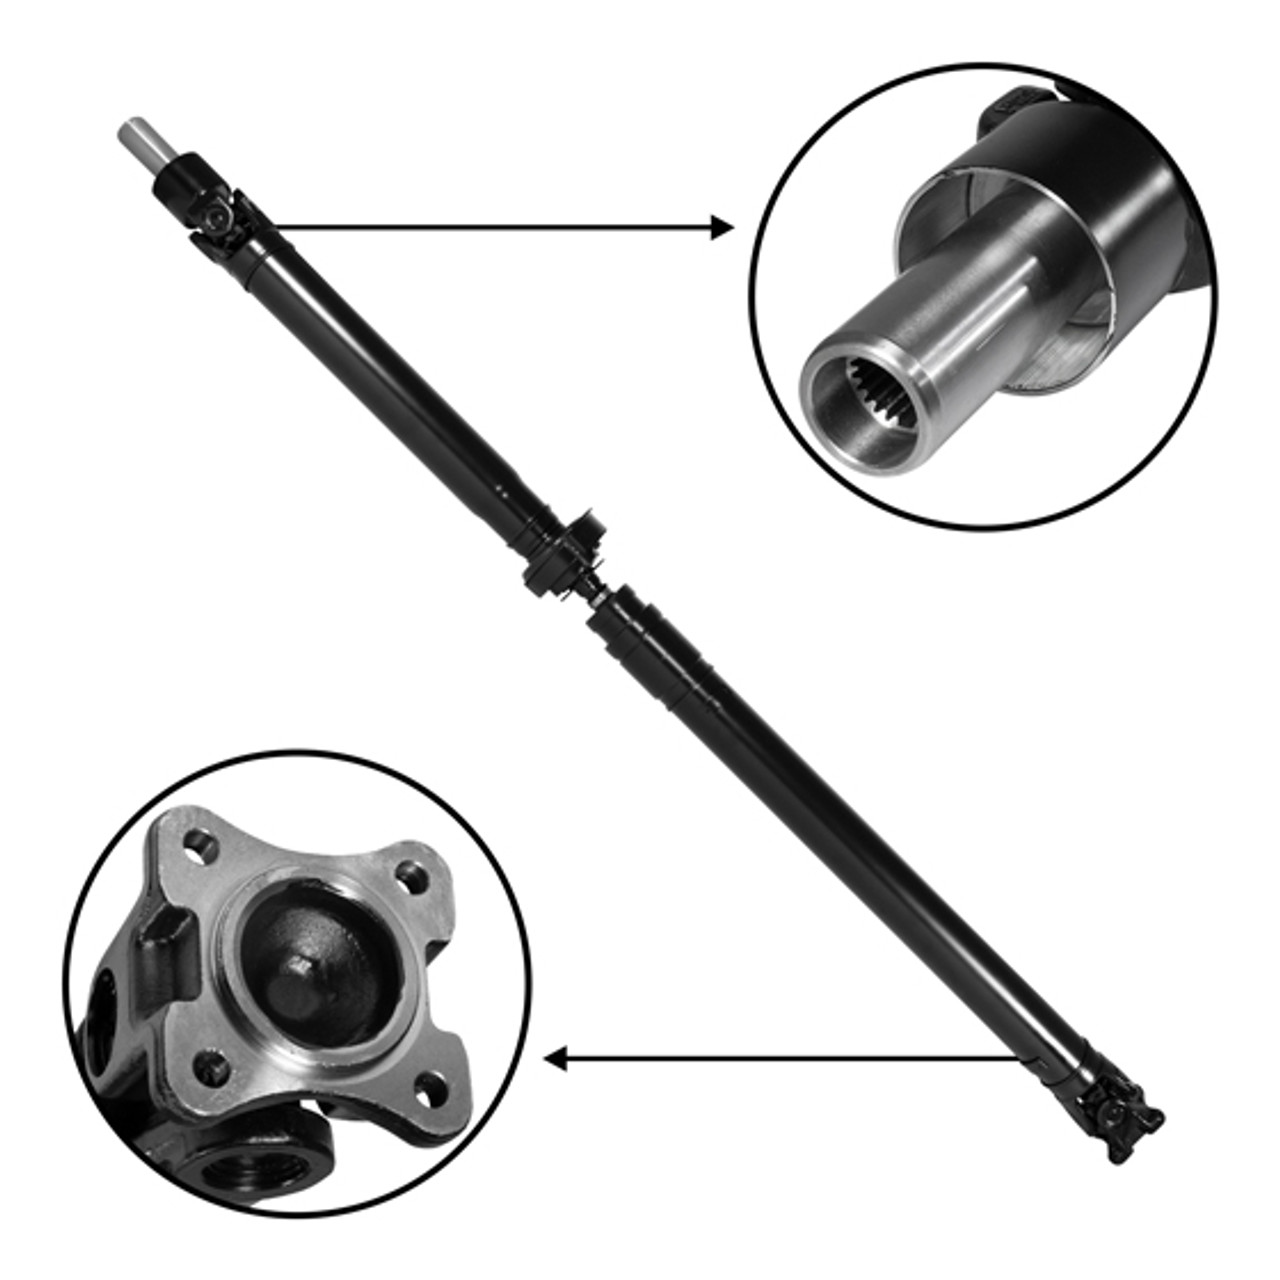 NEW USA Standard Rear Driveshaft for Subaru Forester, AWD, A/T, 57.875" Overall length